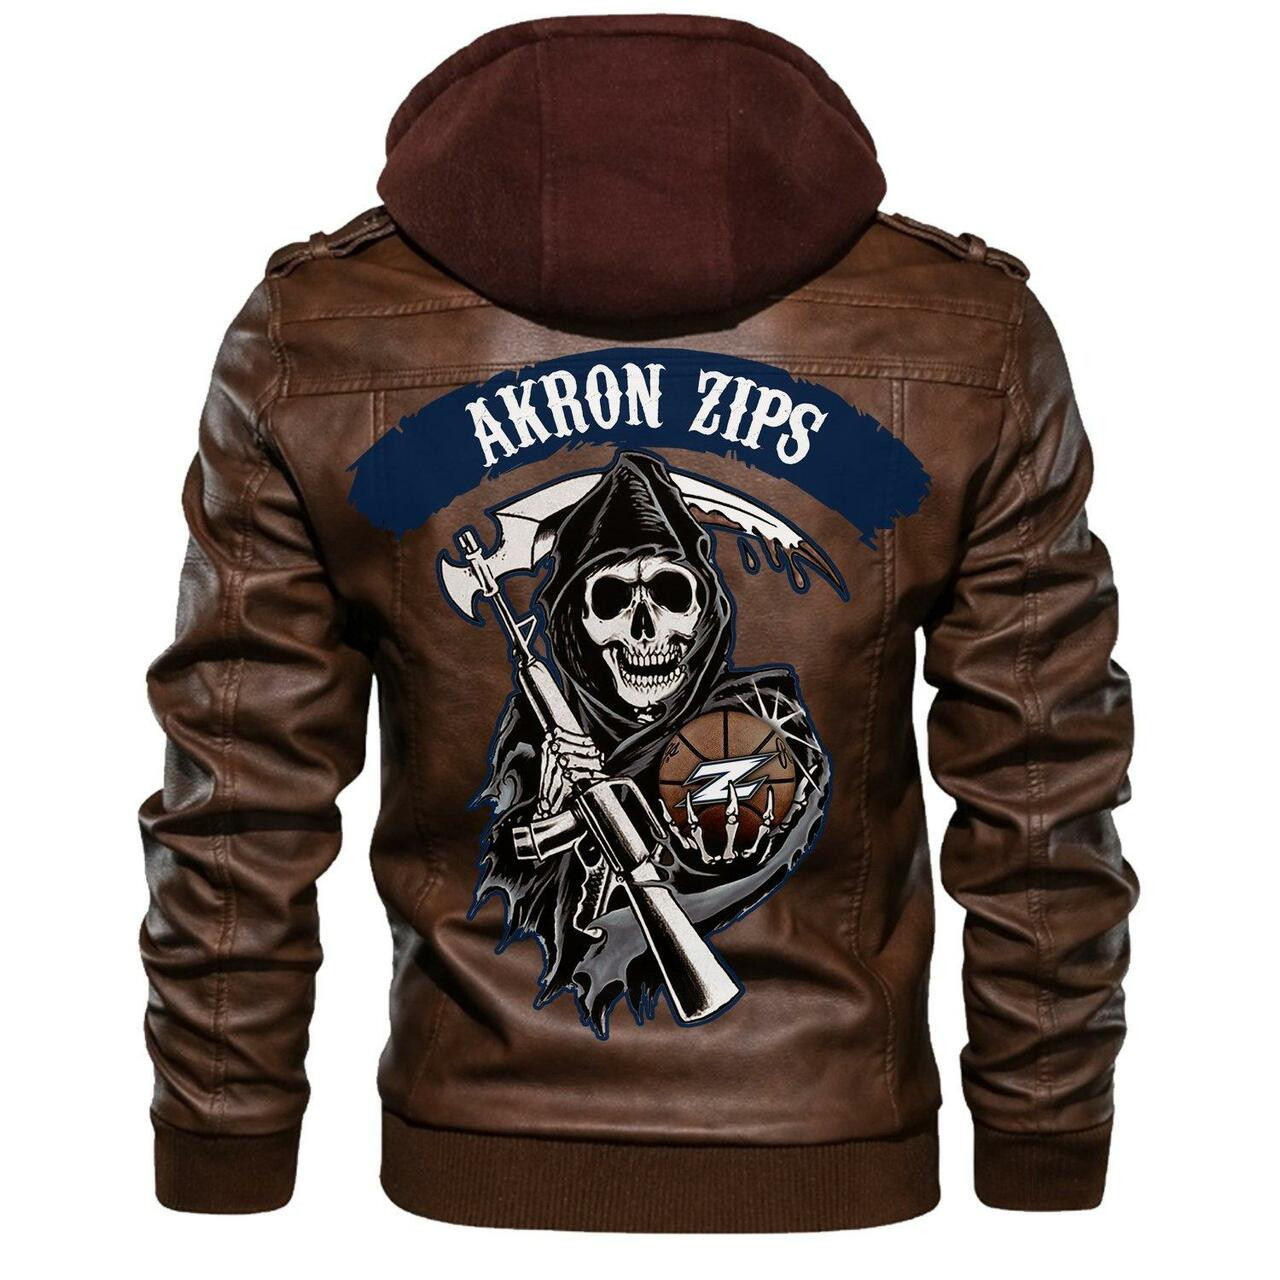 You can find Leather Jacket online at a great price 18